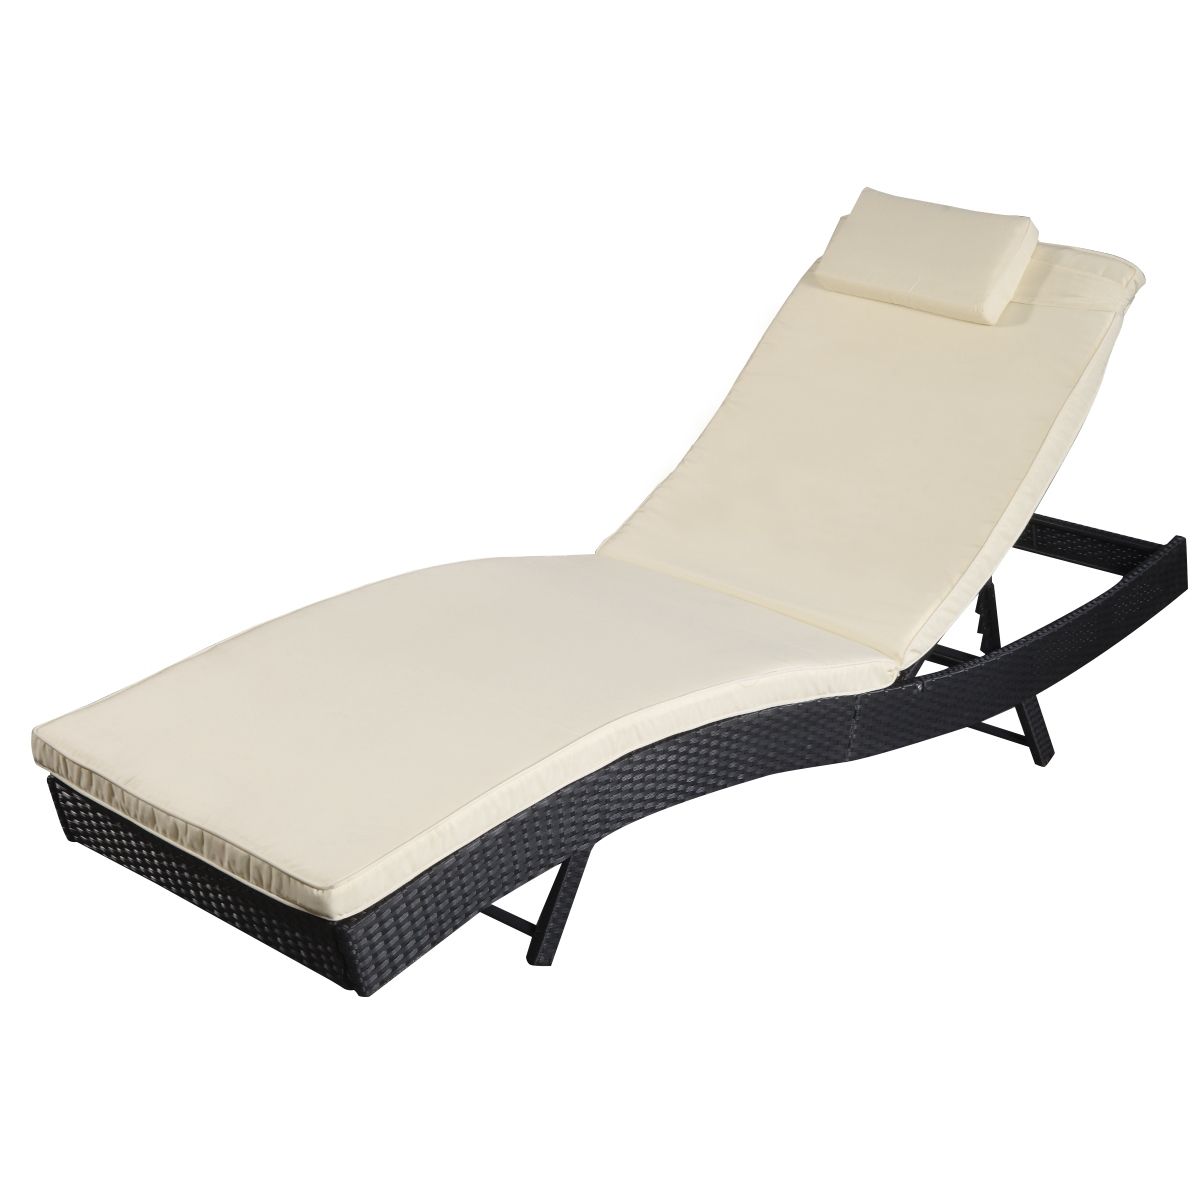 Most Recently Released Costway Adjustable Pool Chaise Lounge Chair Outdoor Patio Inside Portable Outdoor Chaise Lounge Chairs (View 8 of 15)